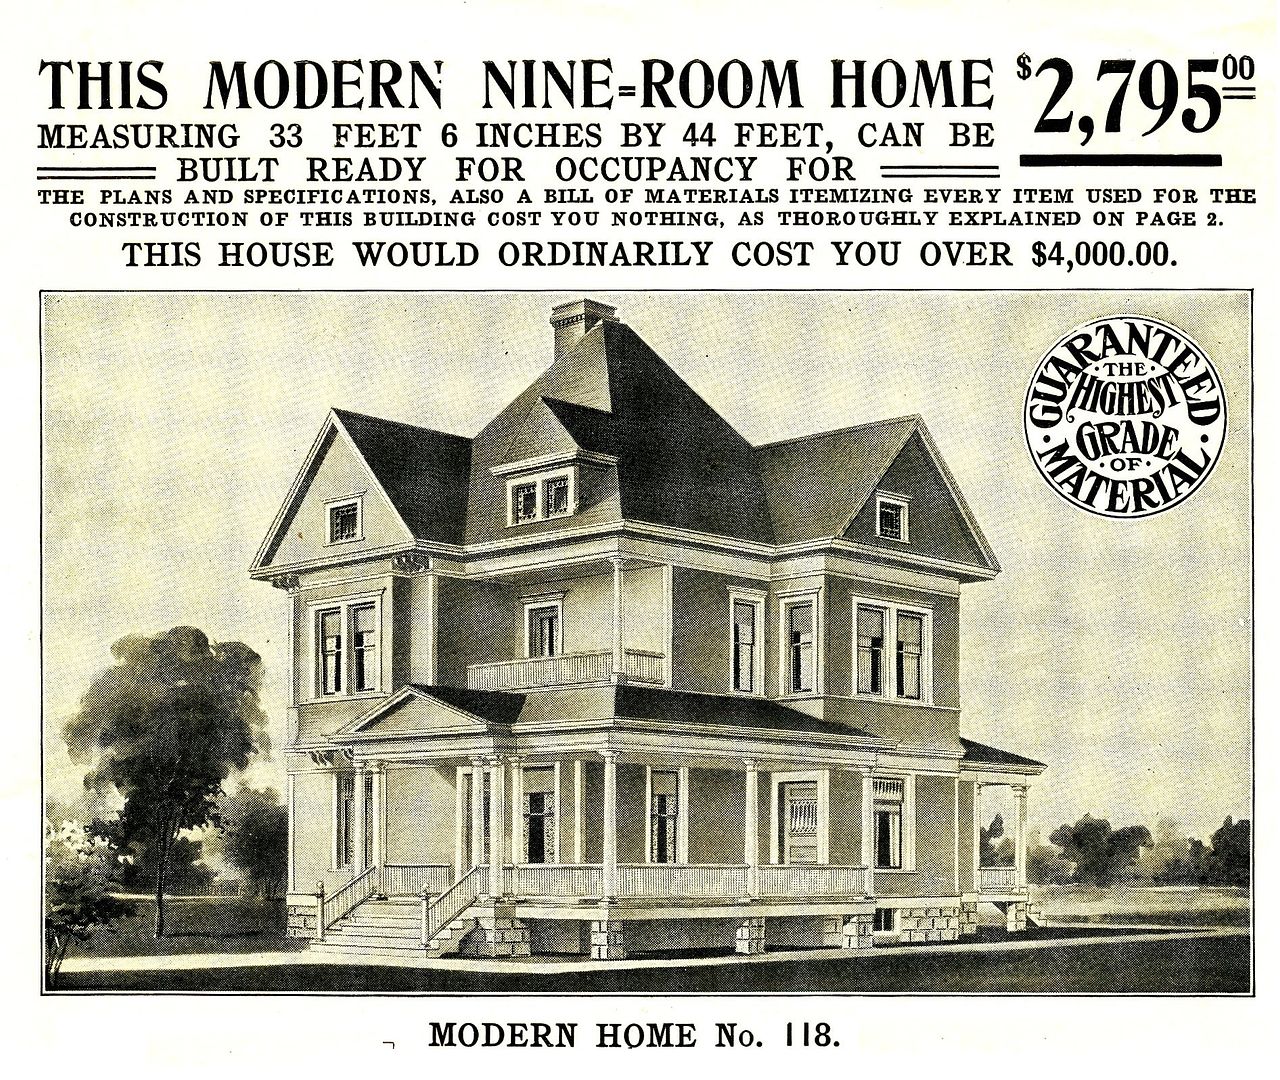 Modern Home #118 was first offered in the 1908 Sears Modern Homes catalog, which was the VERY first year that Sears sold kit homes. 